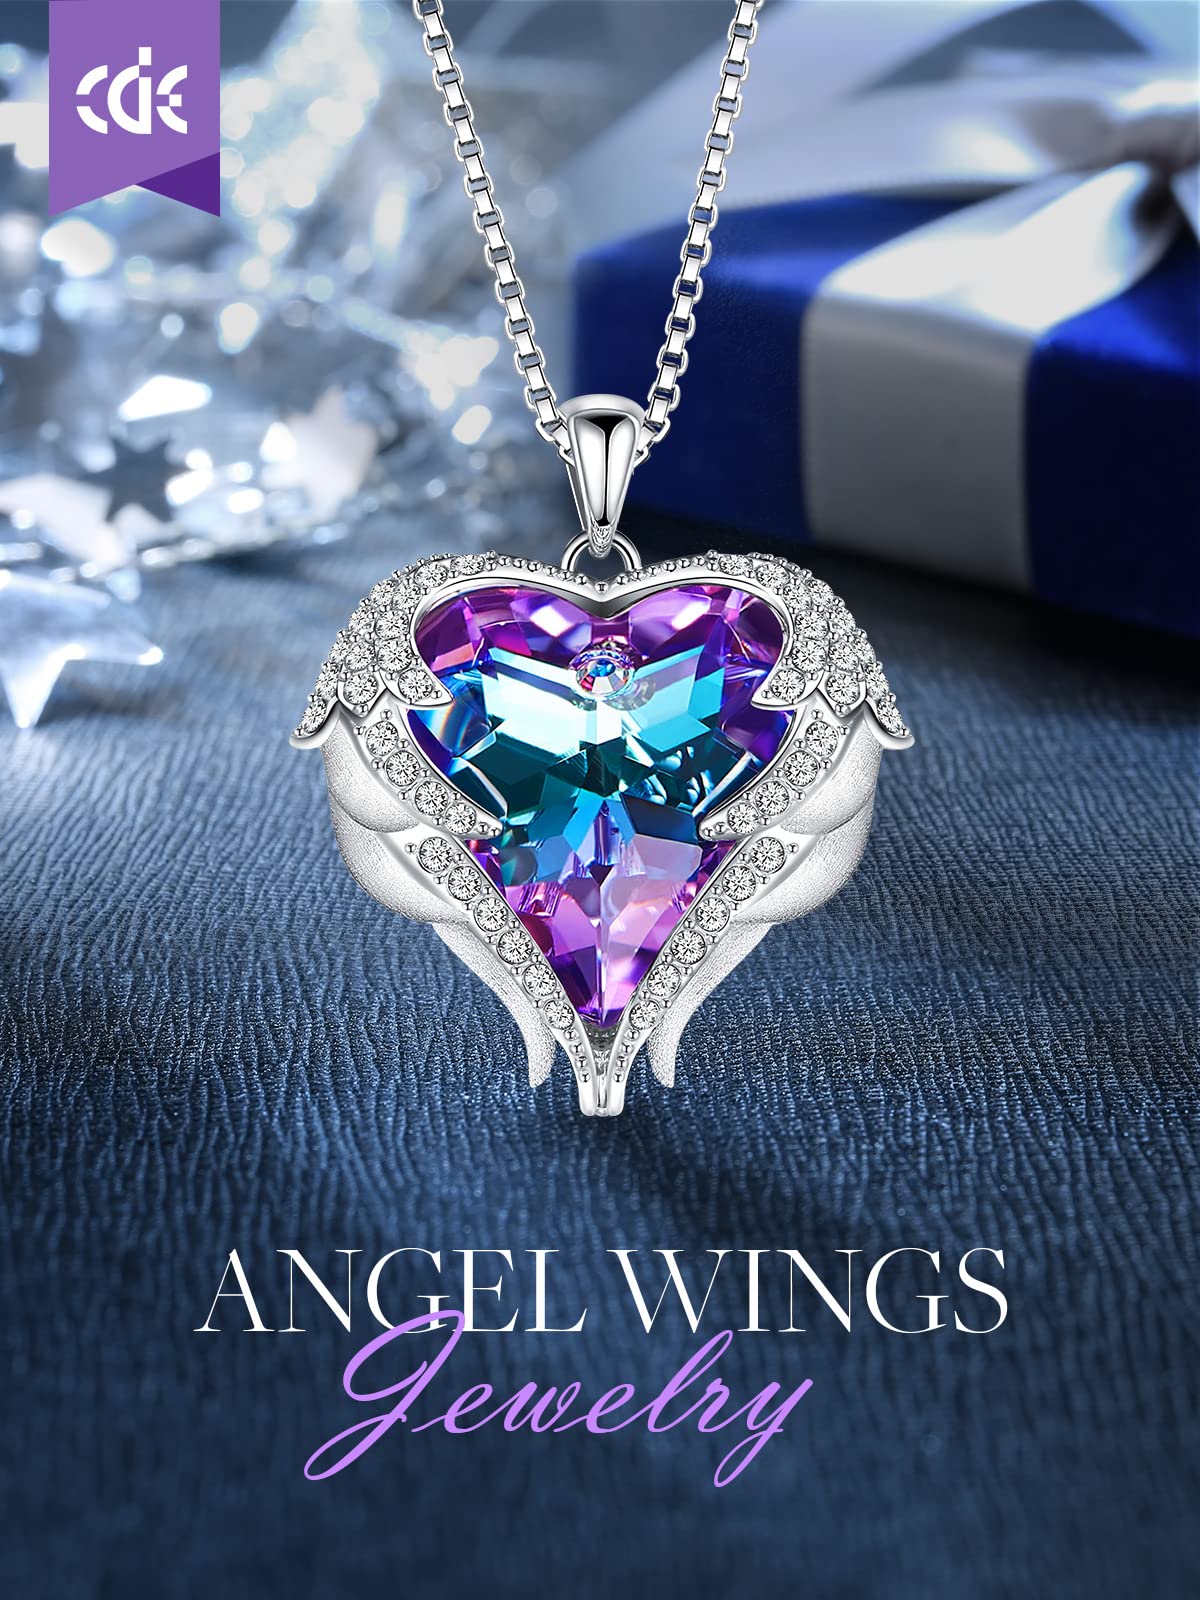 CDE Angel Wing Love Heart Necklaces for Women, Silver Tone/Gold Tone Pendant Necklace Jewelry Gifts for Her on Christmas, Valentine's/Mother's Day, Anniversary, Birthday Gifts for Women Girls Wife Girlfriend